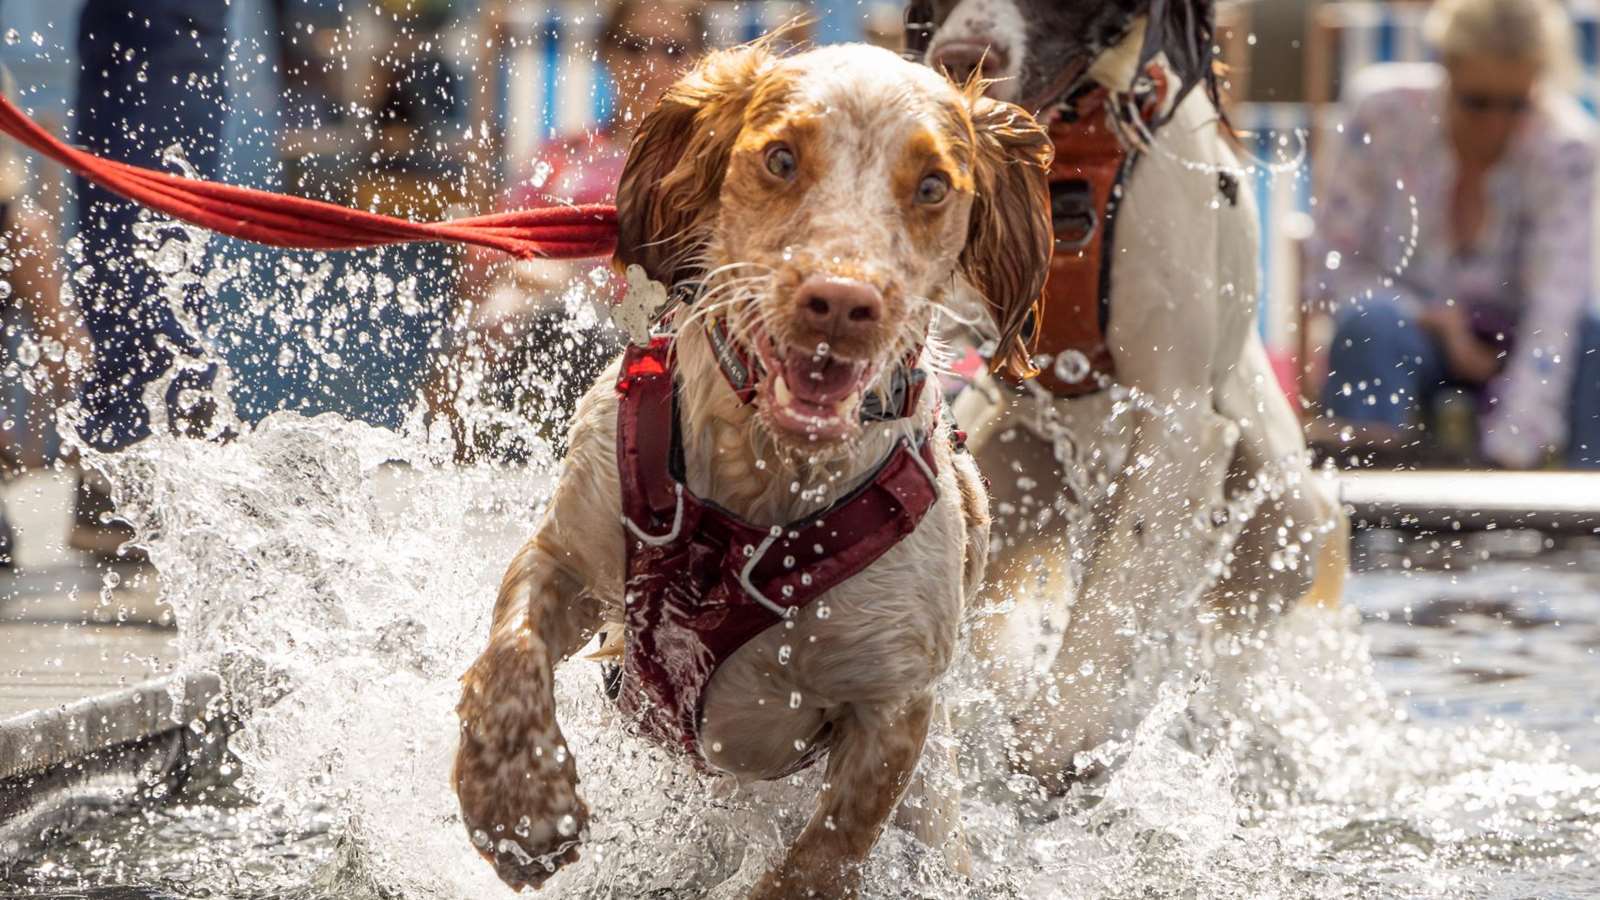 Spaniels playing in water at The Goodwoof dog event in 2022